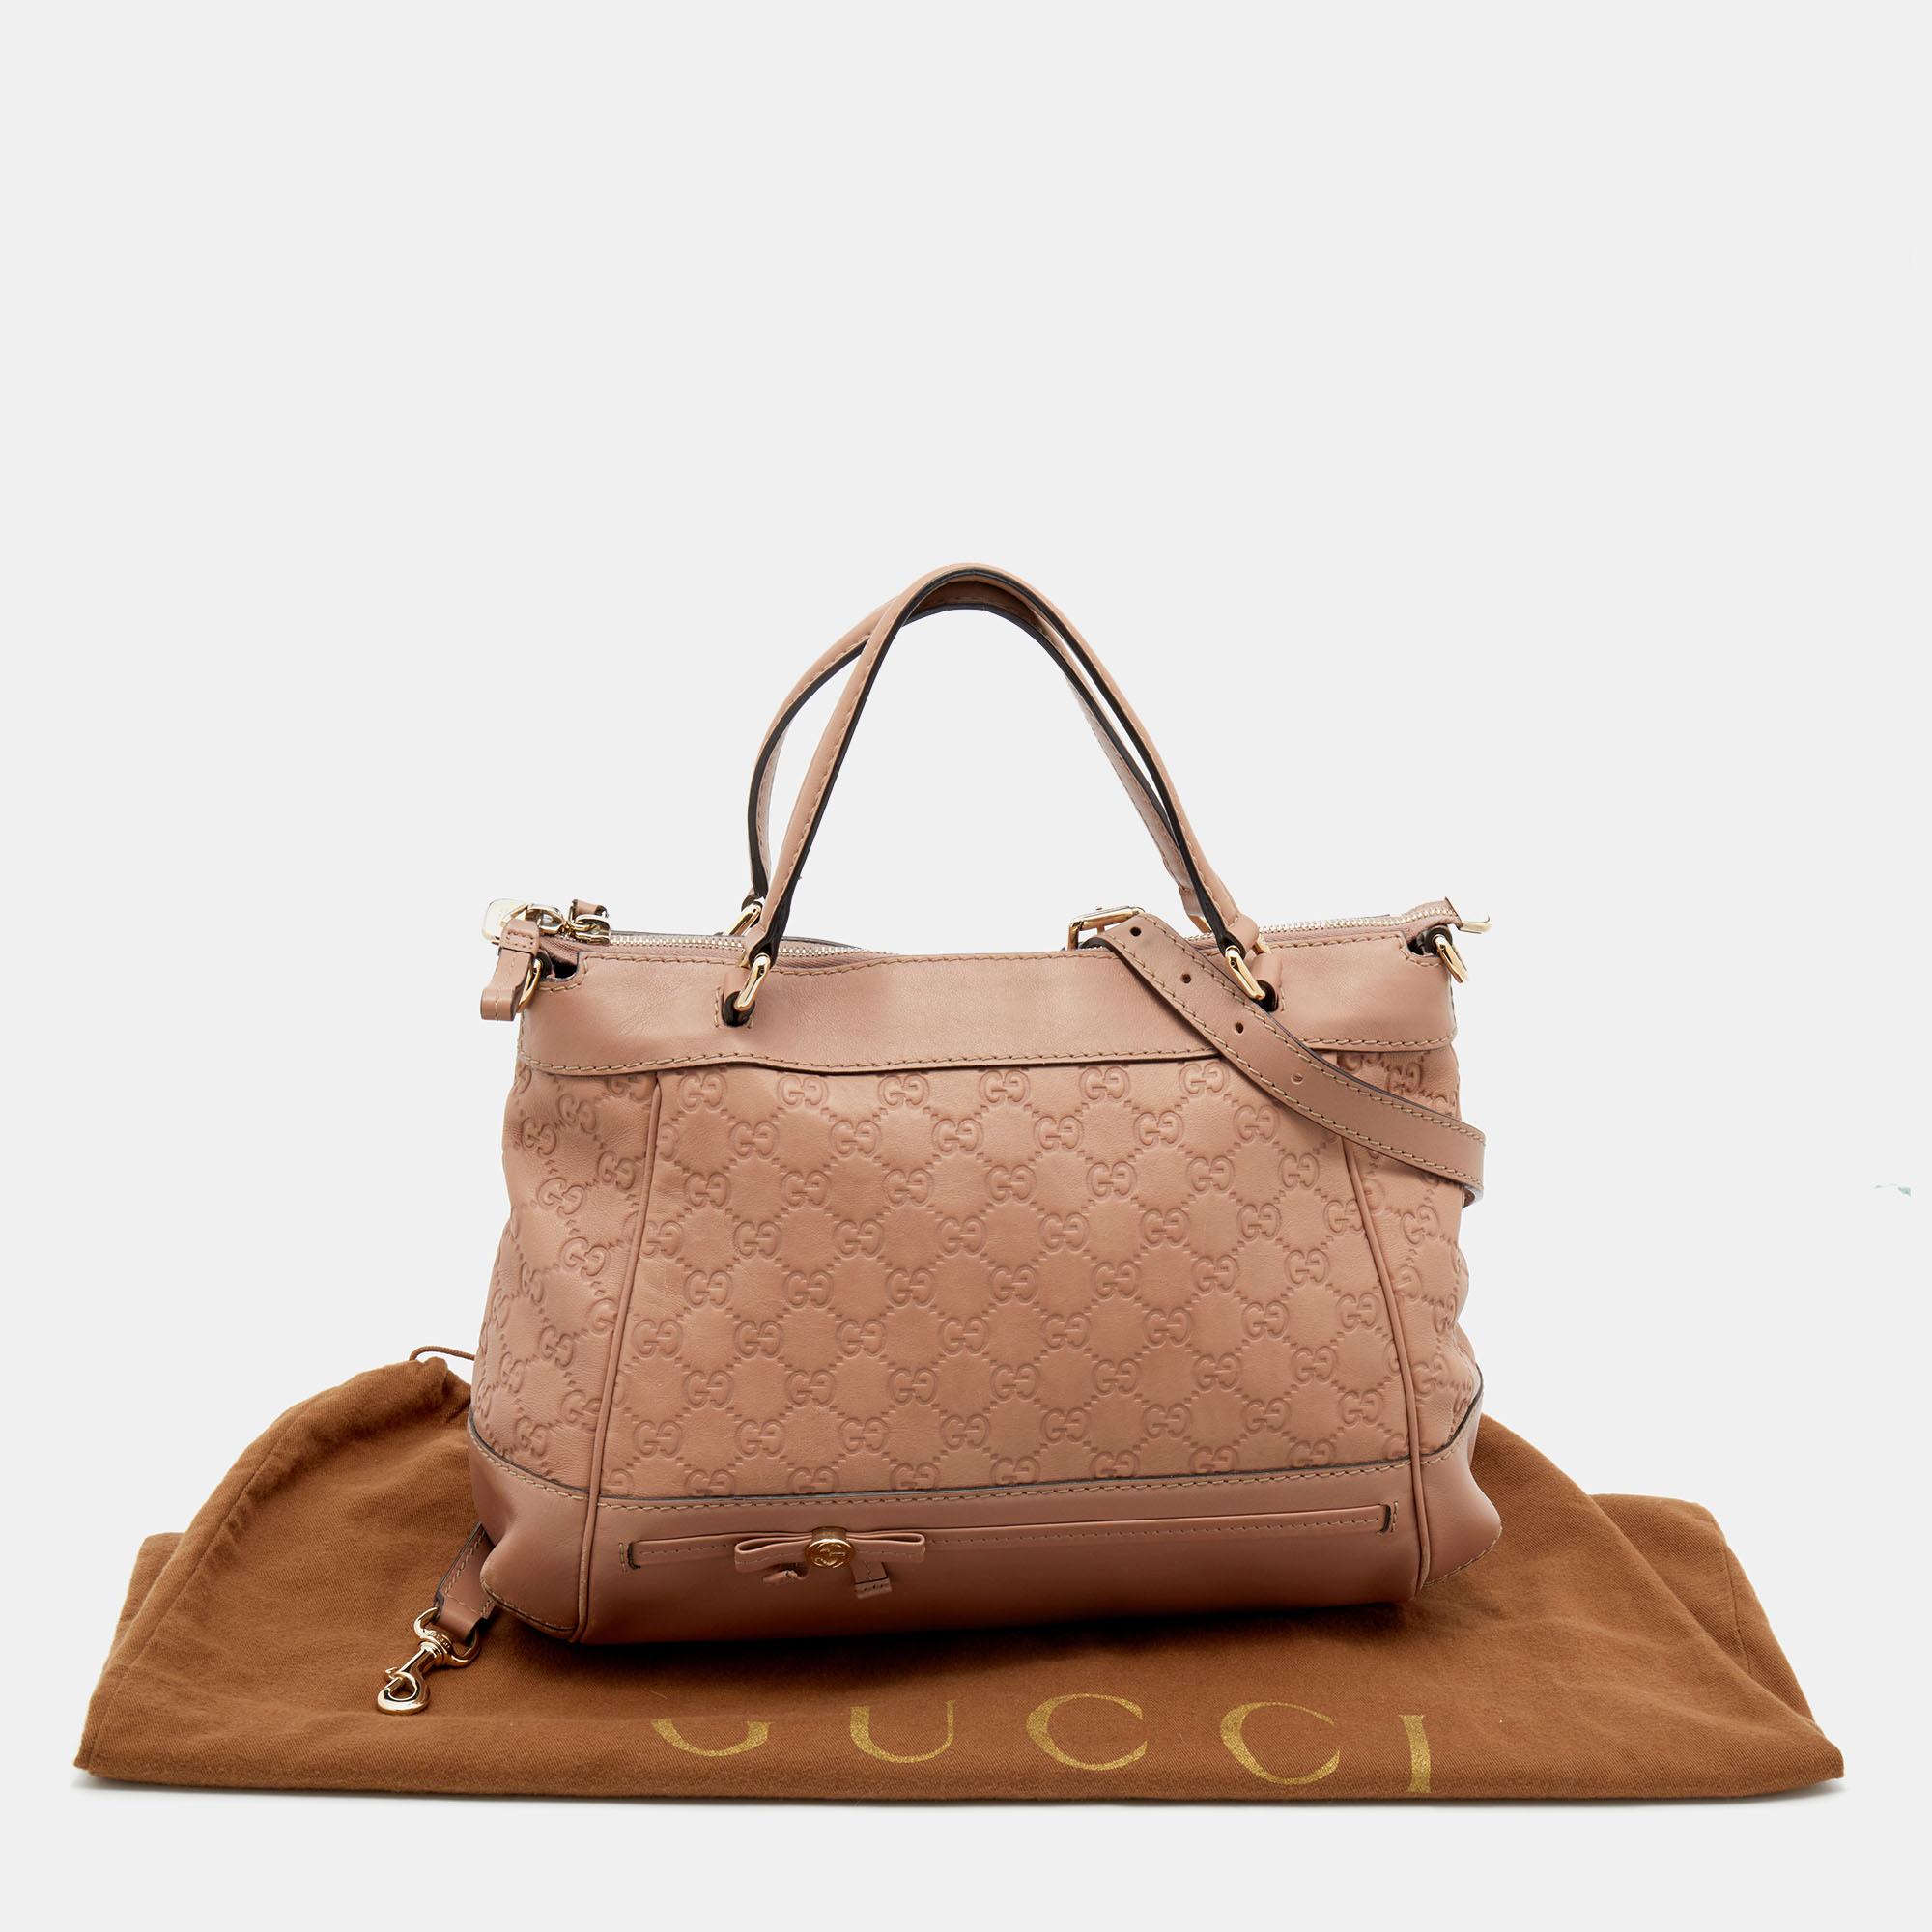 Gucci Beige Guccissima Leather Mayfair Bow Tote 8